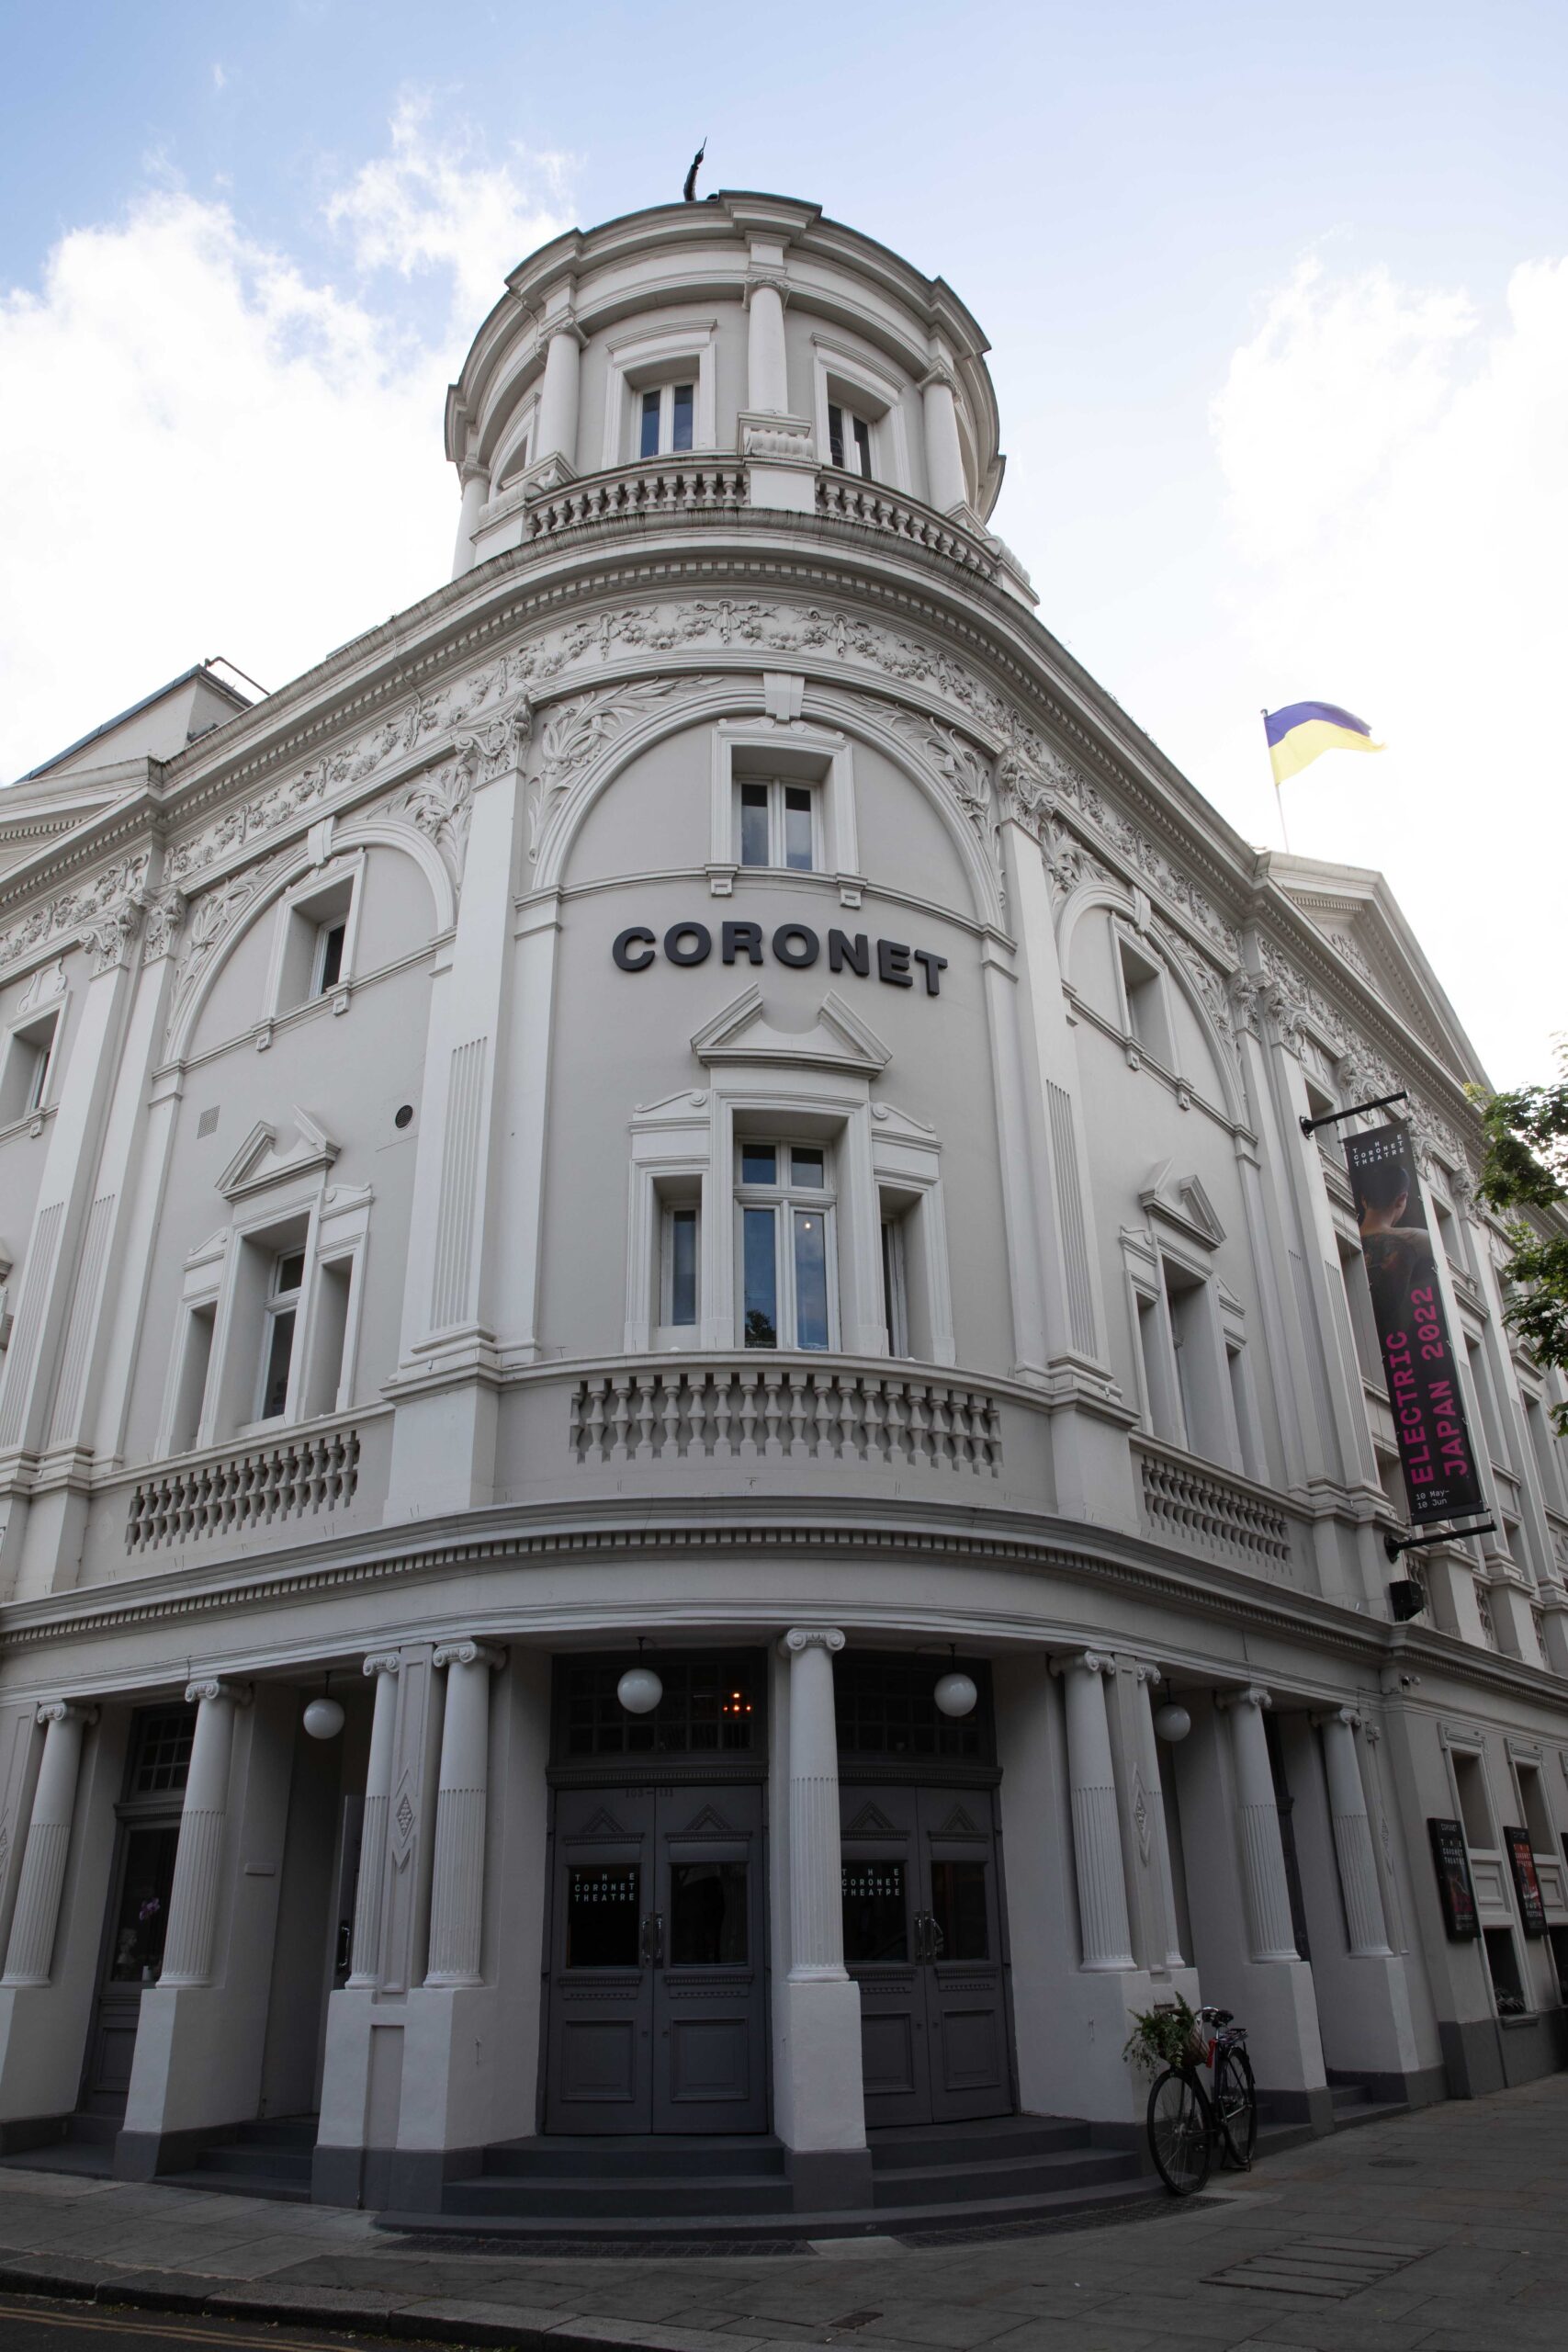 The exterior view of the Coronet Theatre in London